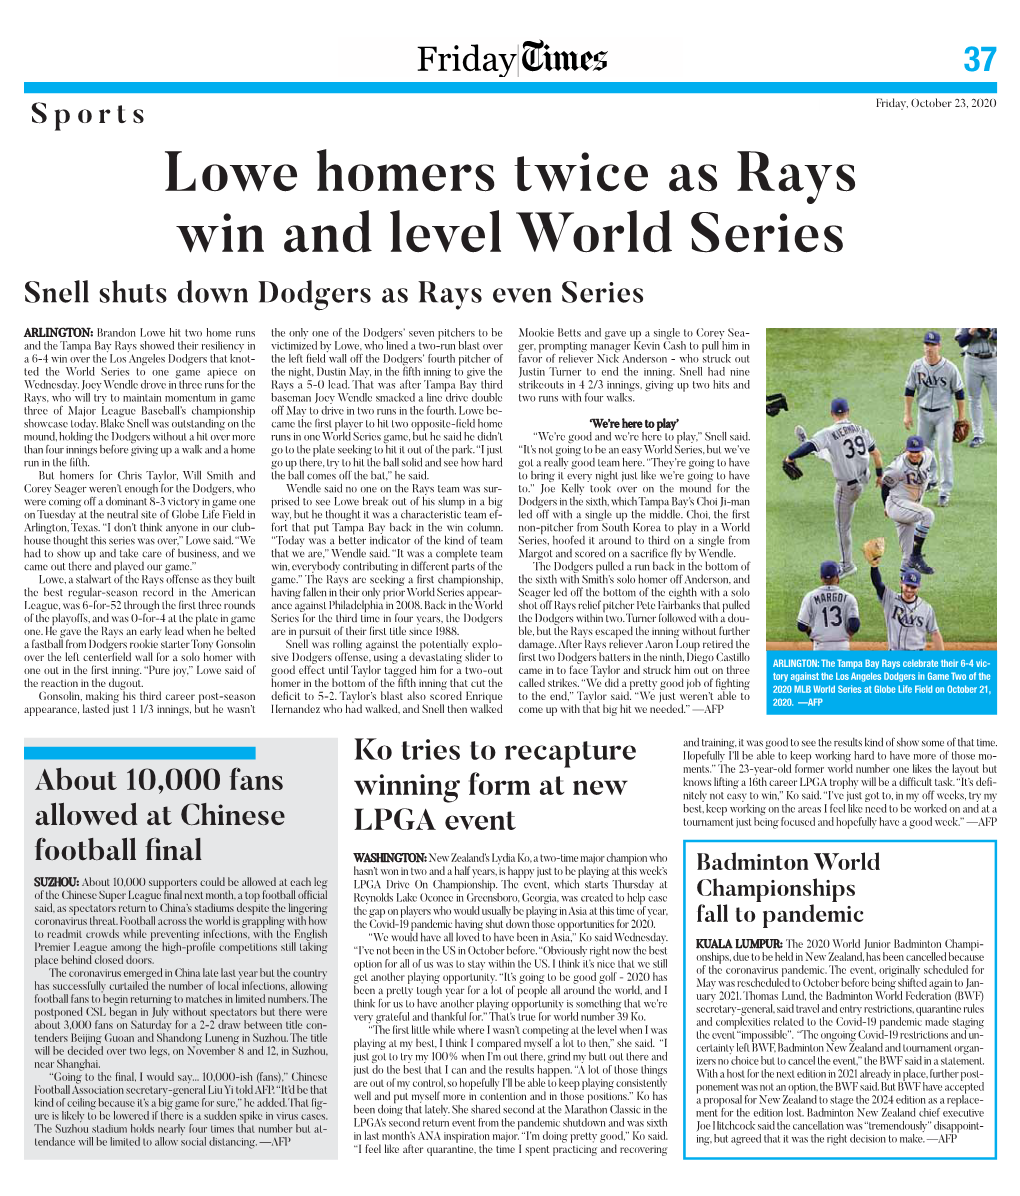 Lowe Homers Twice As Rays Win and Level World Series Snell Shuts Down Dodgers As Rays Even Series